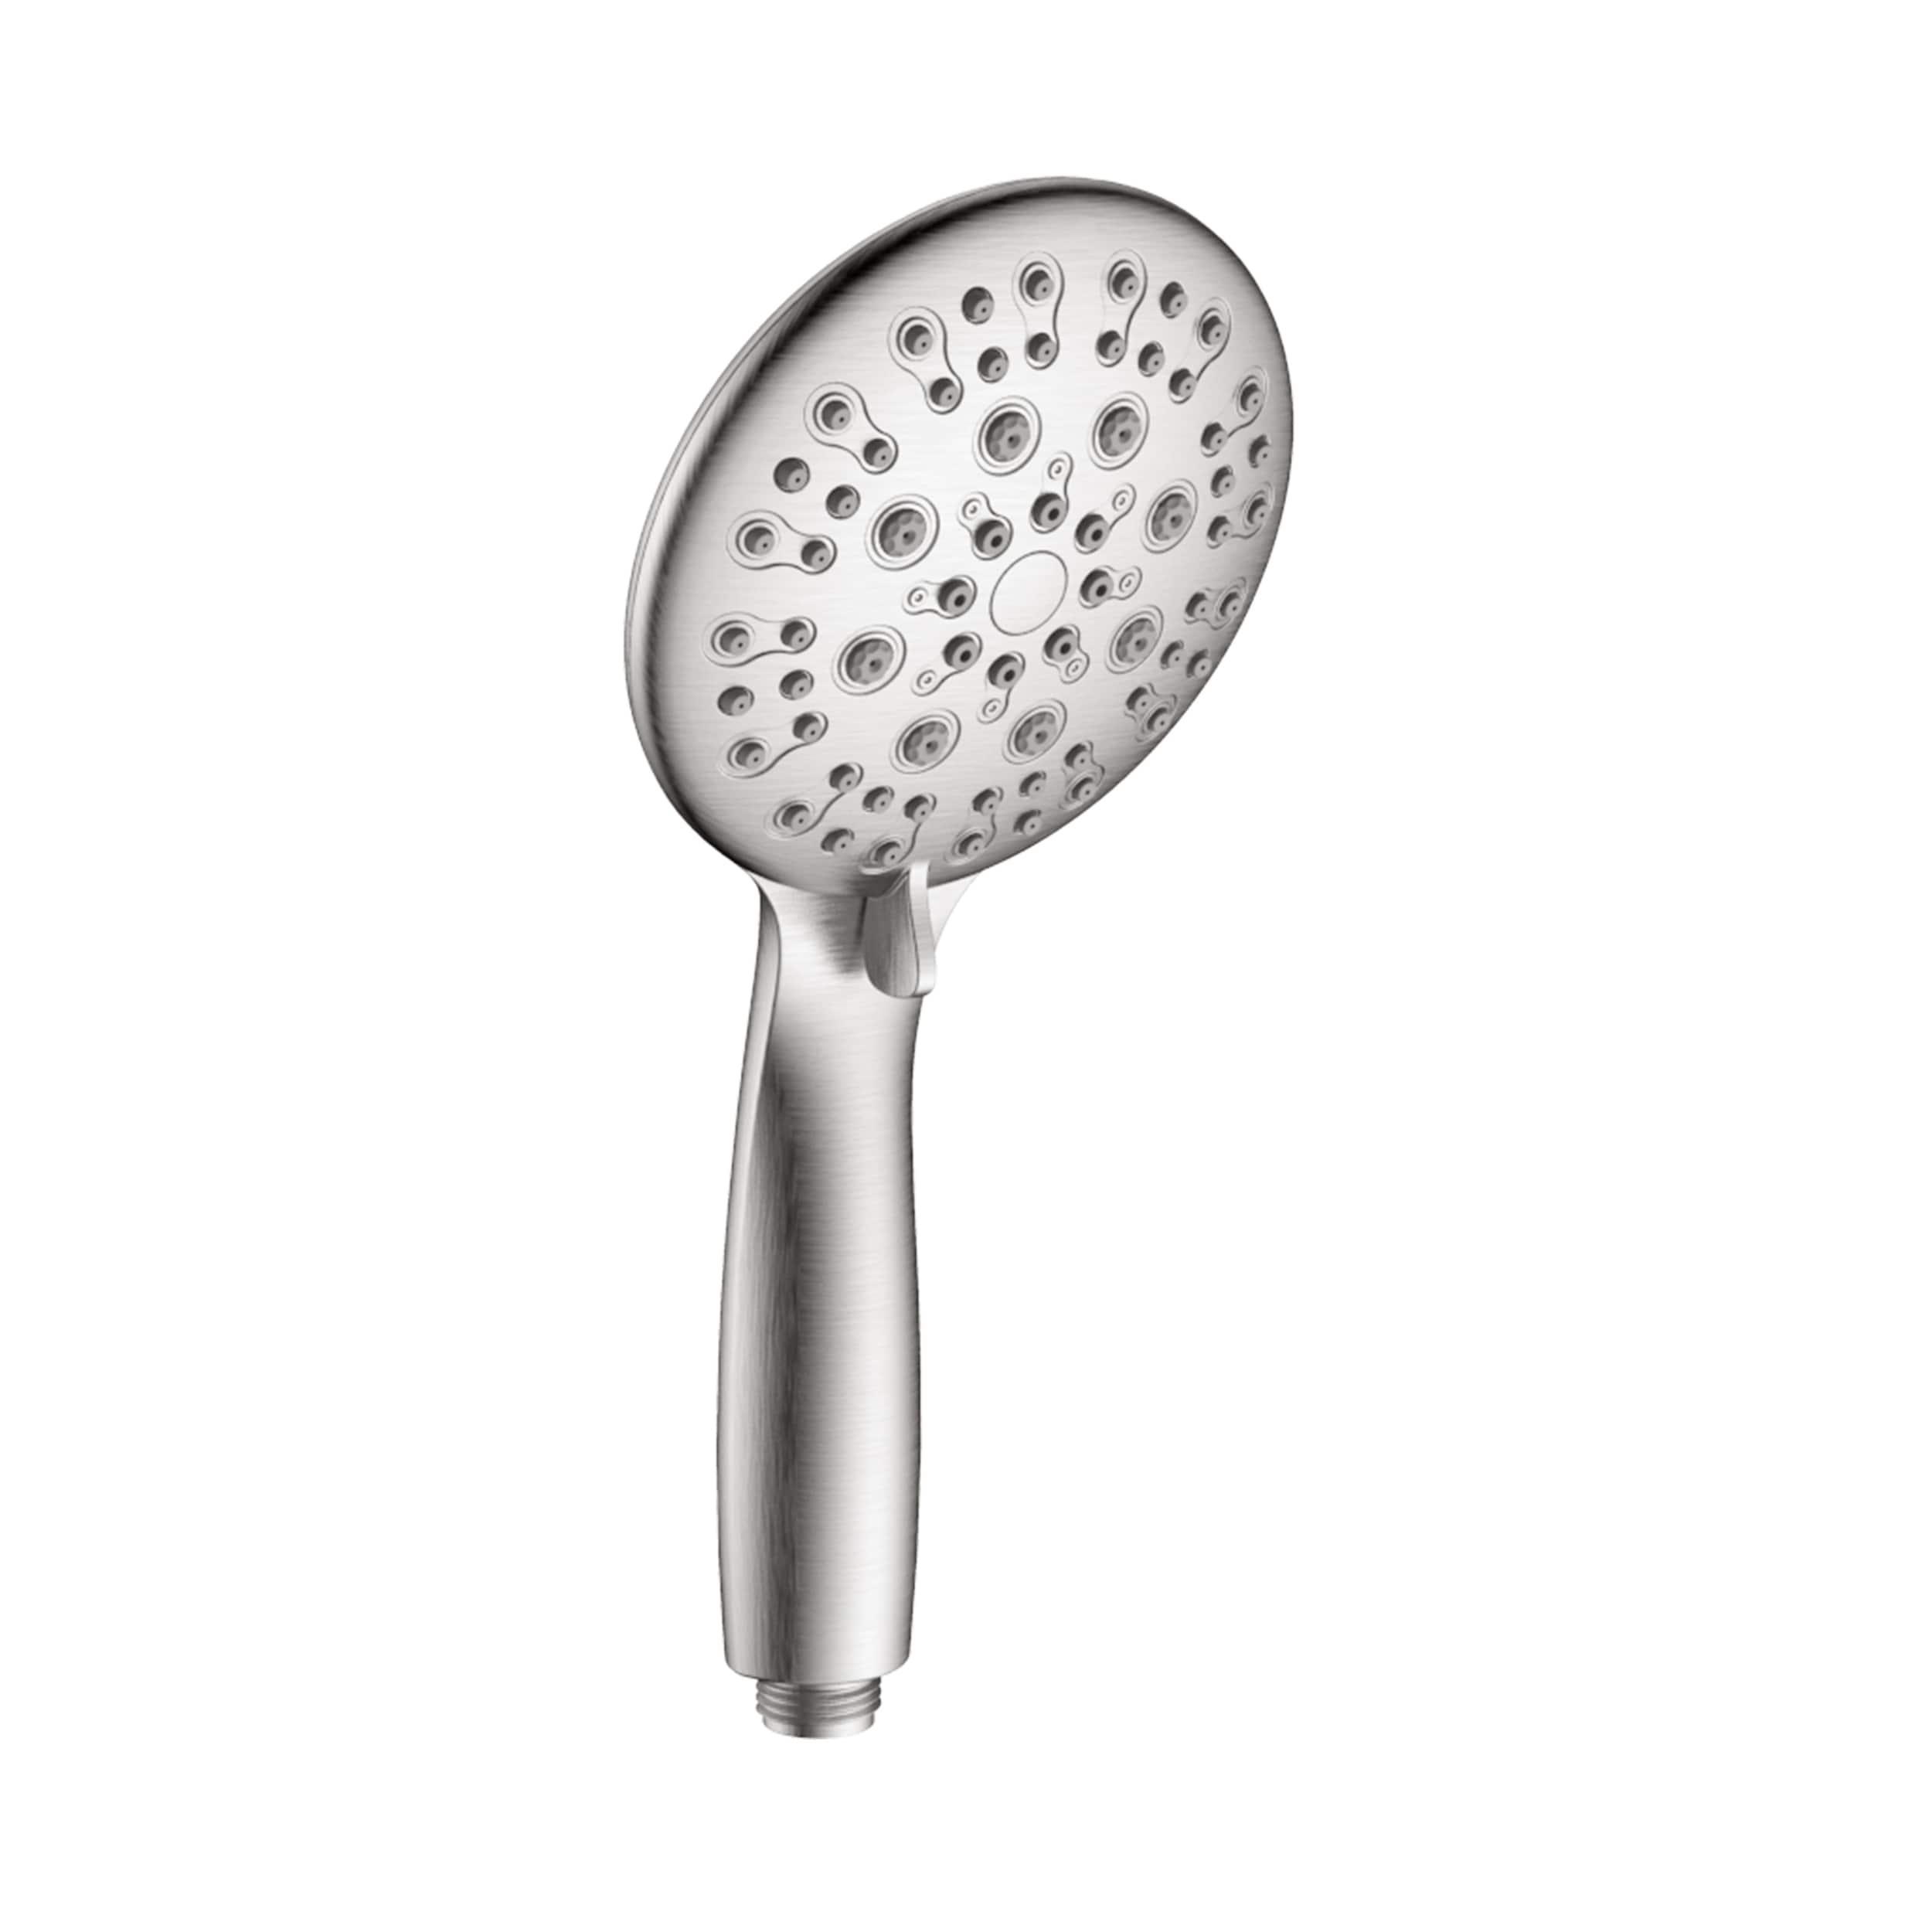 https://ak1.ostkcdn.com/images/products/is/images/direct/13d4001825295b2aebb0be2aebb90eb926b09a49/Multi-Function-Shower-Head---Shower-System-with-4%22-Rain-Showerhead-And-Storage-Hook%2C-Simple-Style%2C-Brushed-Nickel.jpg